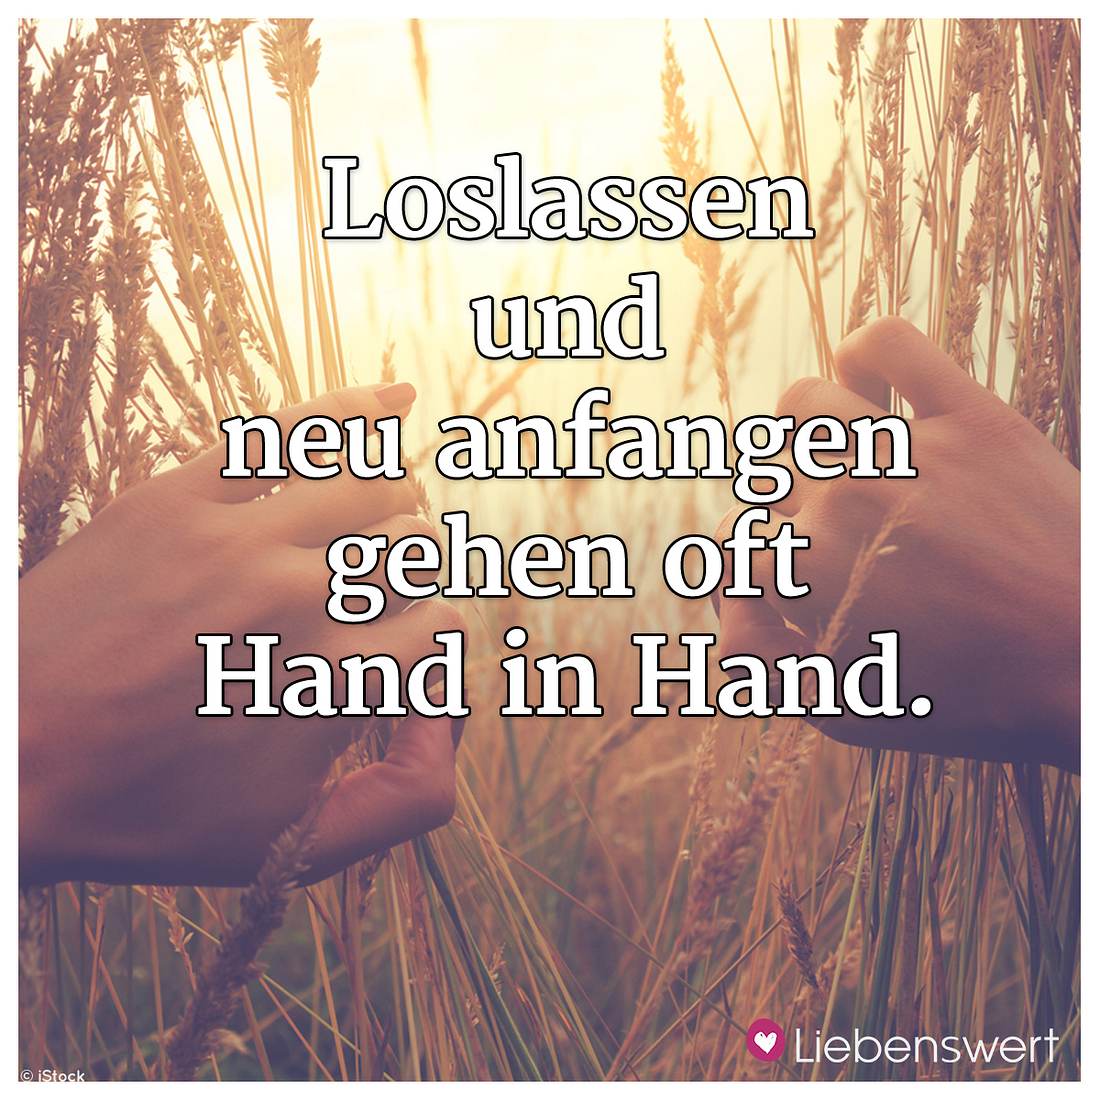 30++ Neuanfang spruch trennung positiv info